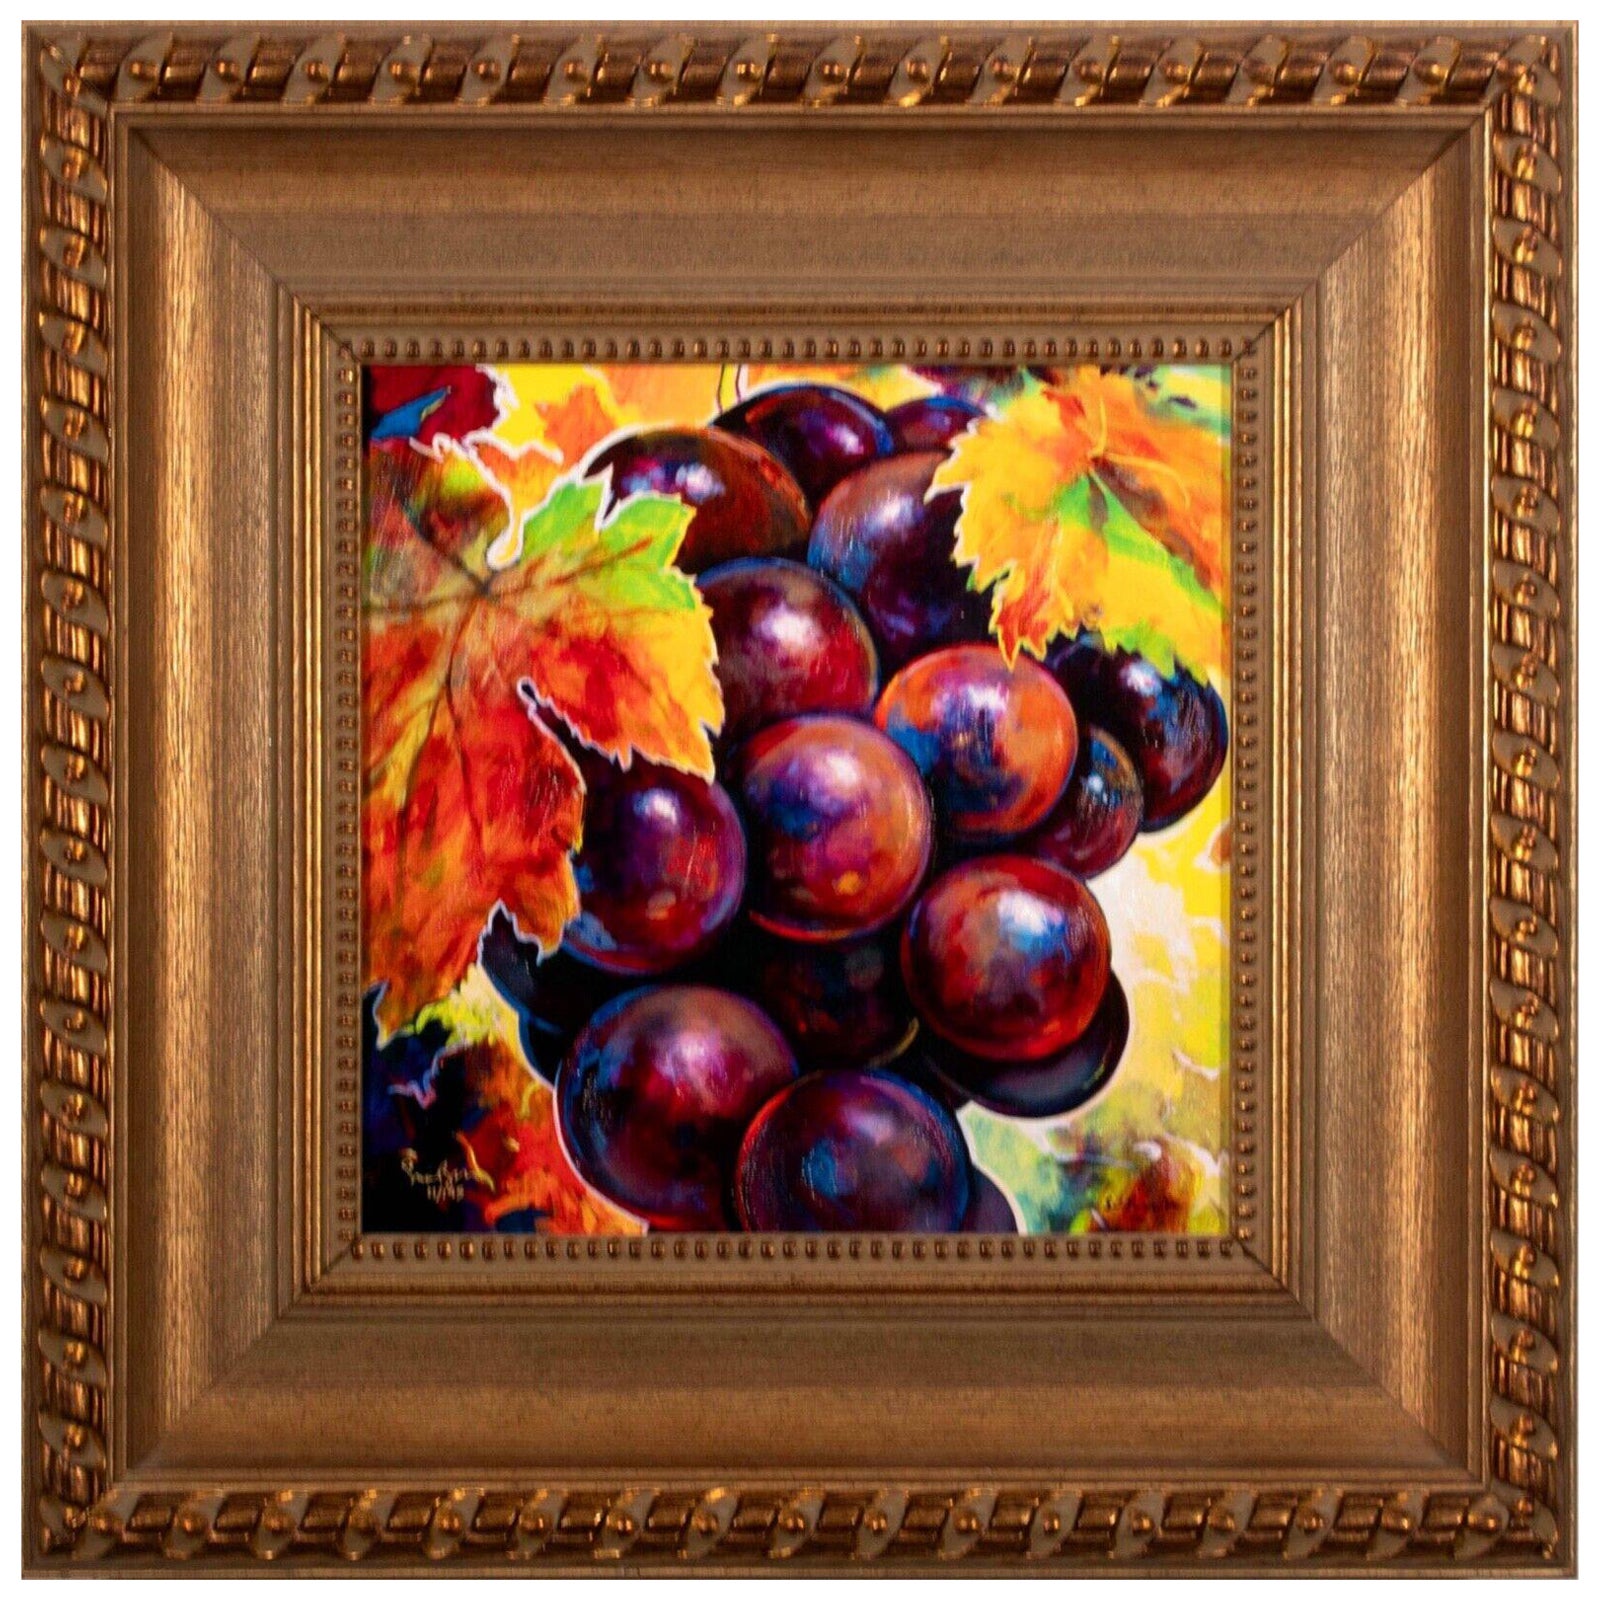 Simon Bull Grapes Giclee Signed Unique Acrylic Painting on Verso Framed 11/195 For Sale